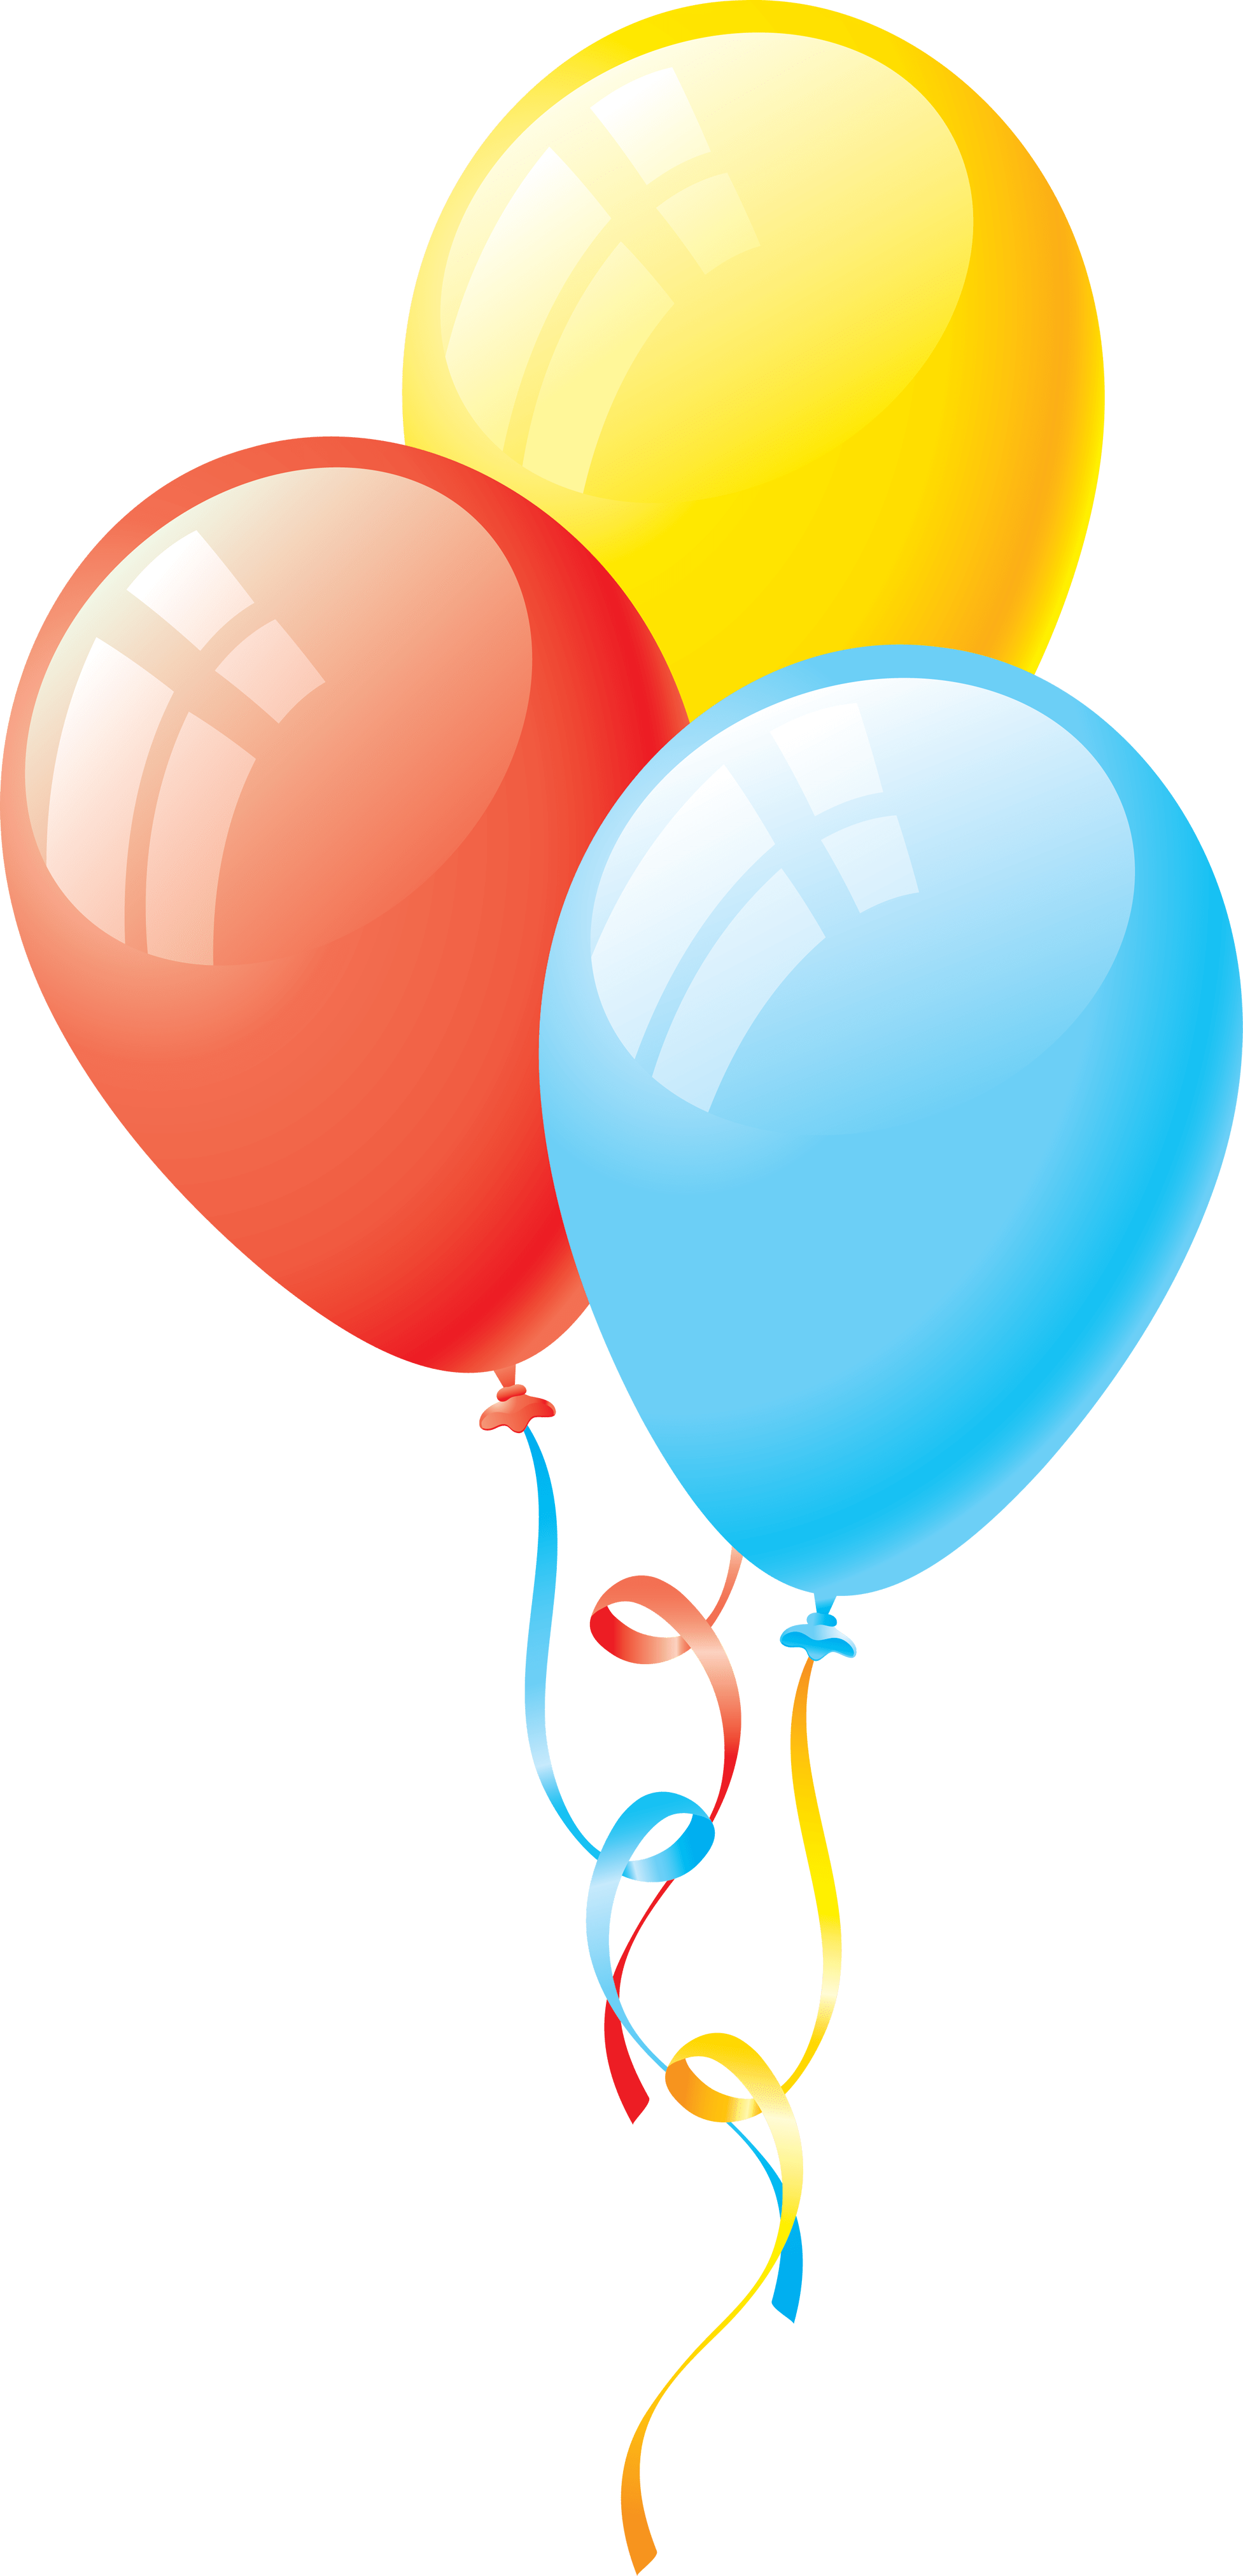  balloons celebrations southwest. Balloon images png